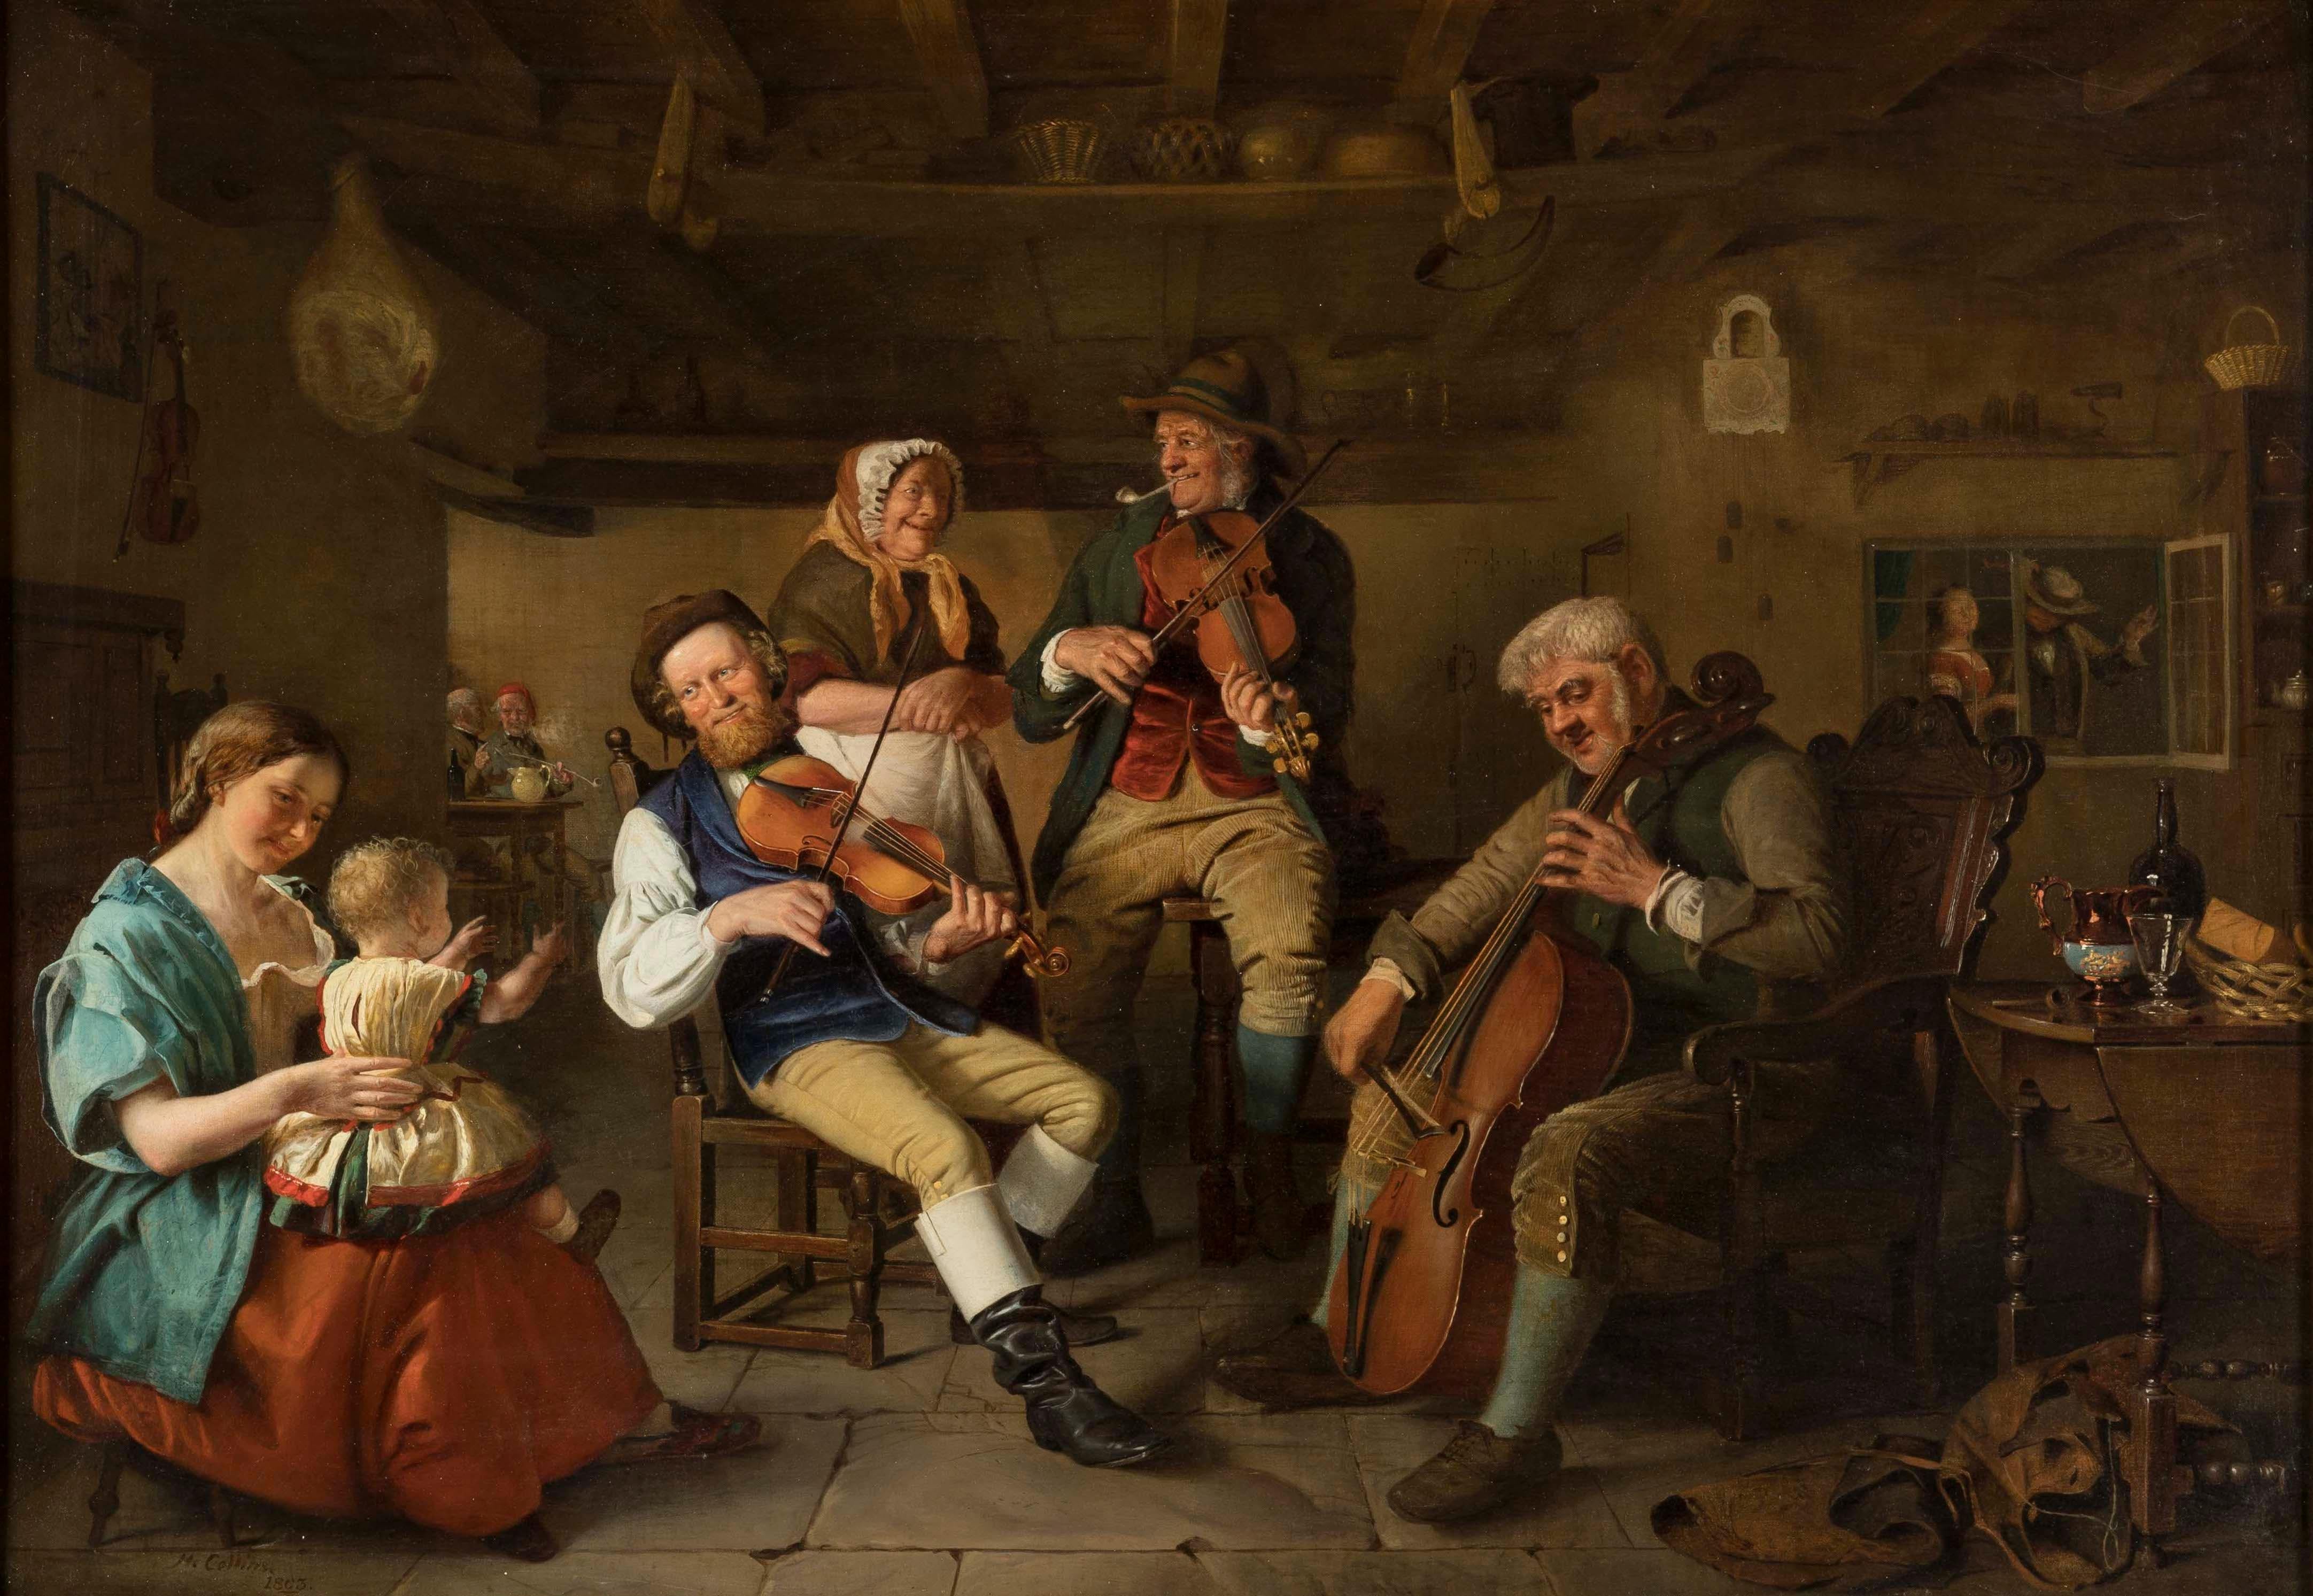 A Musical Company
By Hugh Collins (c. 1834-1896)

Painted in oil on canvas, the tavern scene depicting a trio of musicians surrounded by captivated onlookers. Signed by the artist 